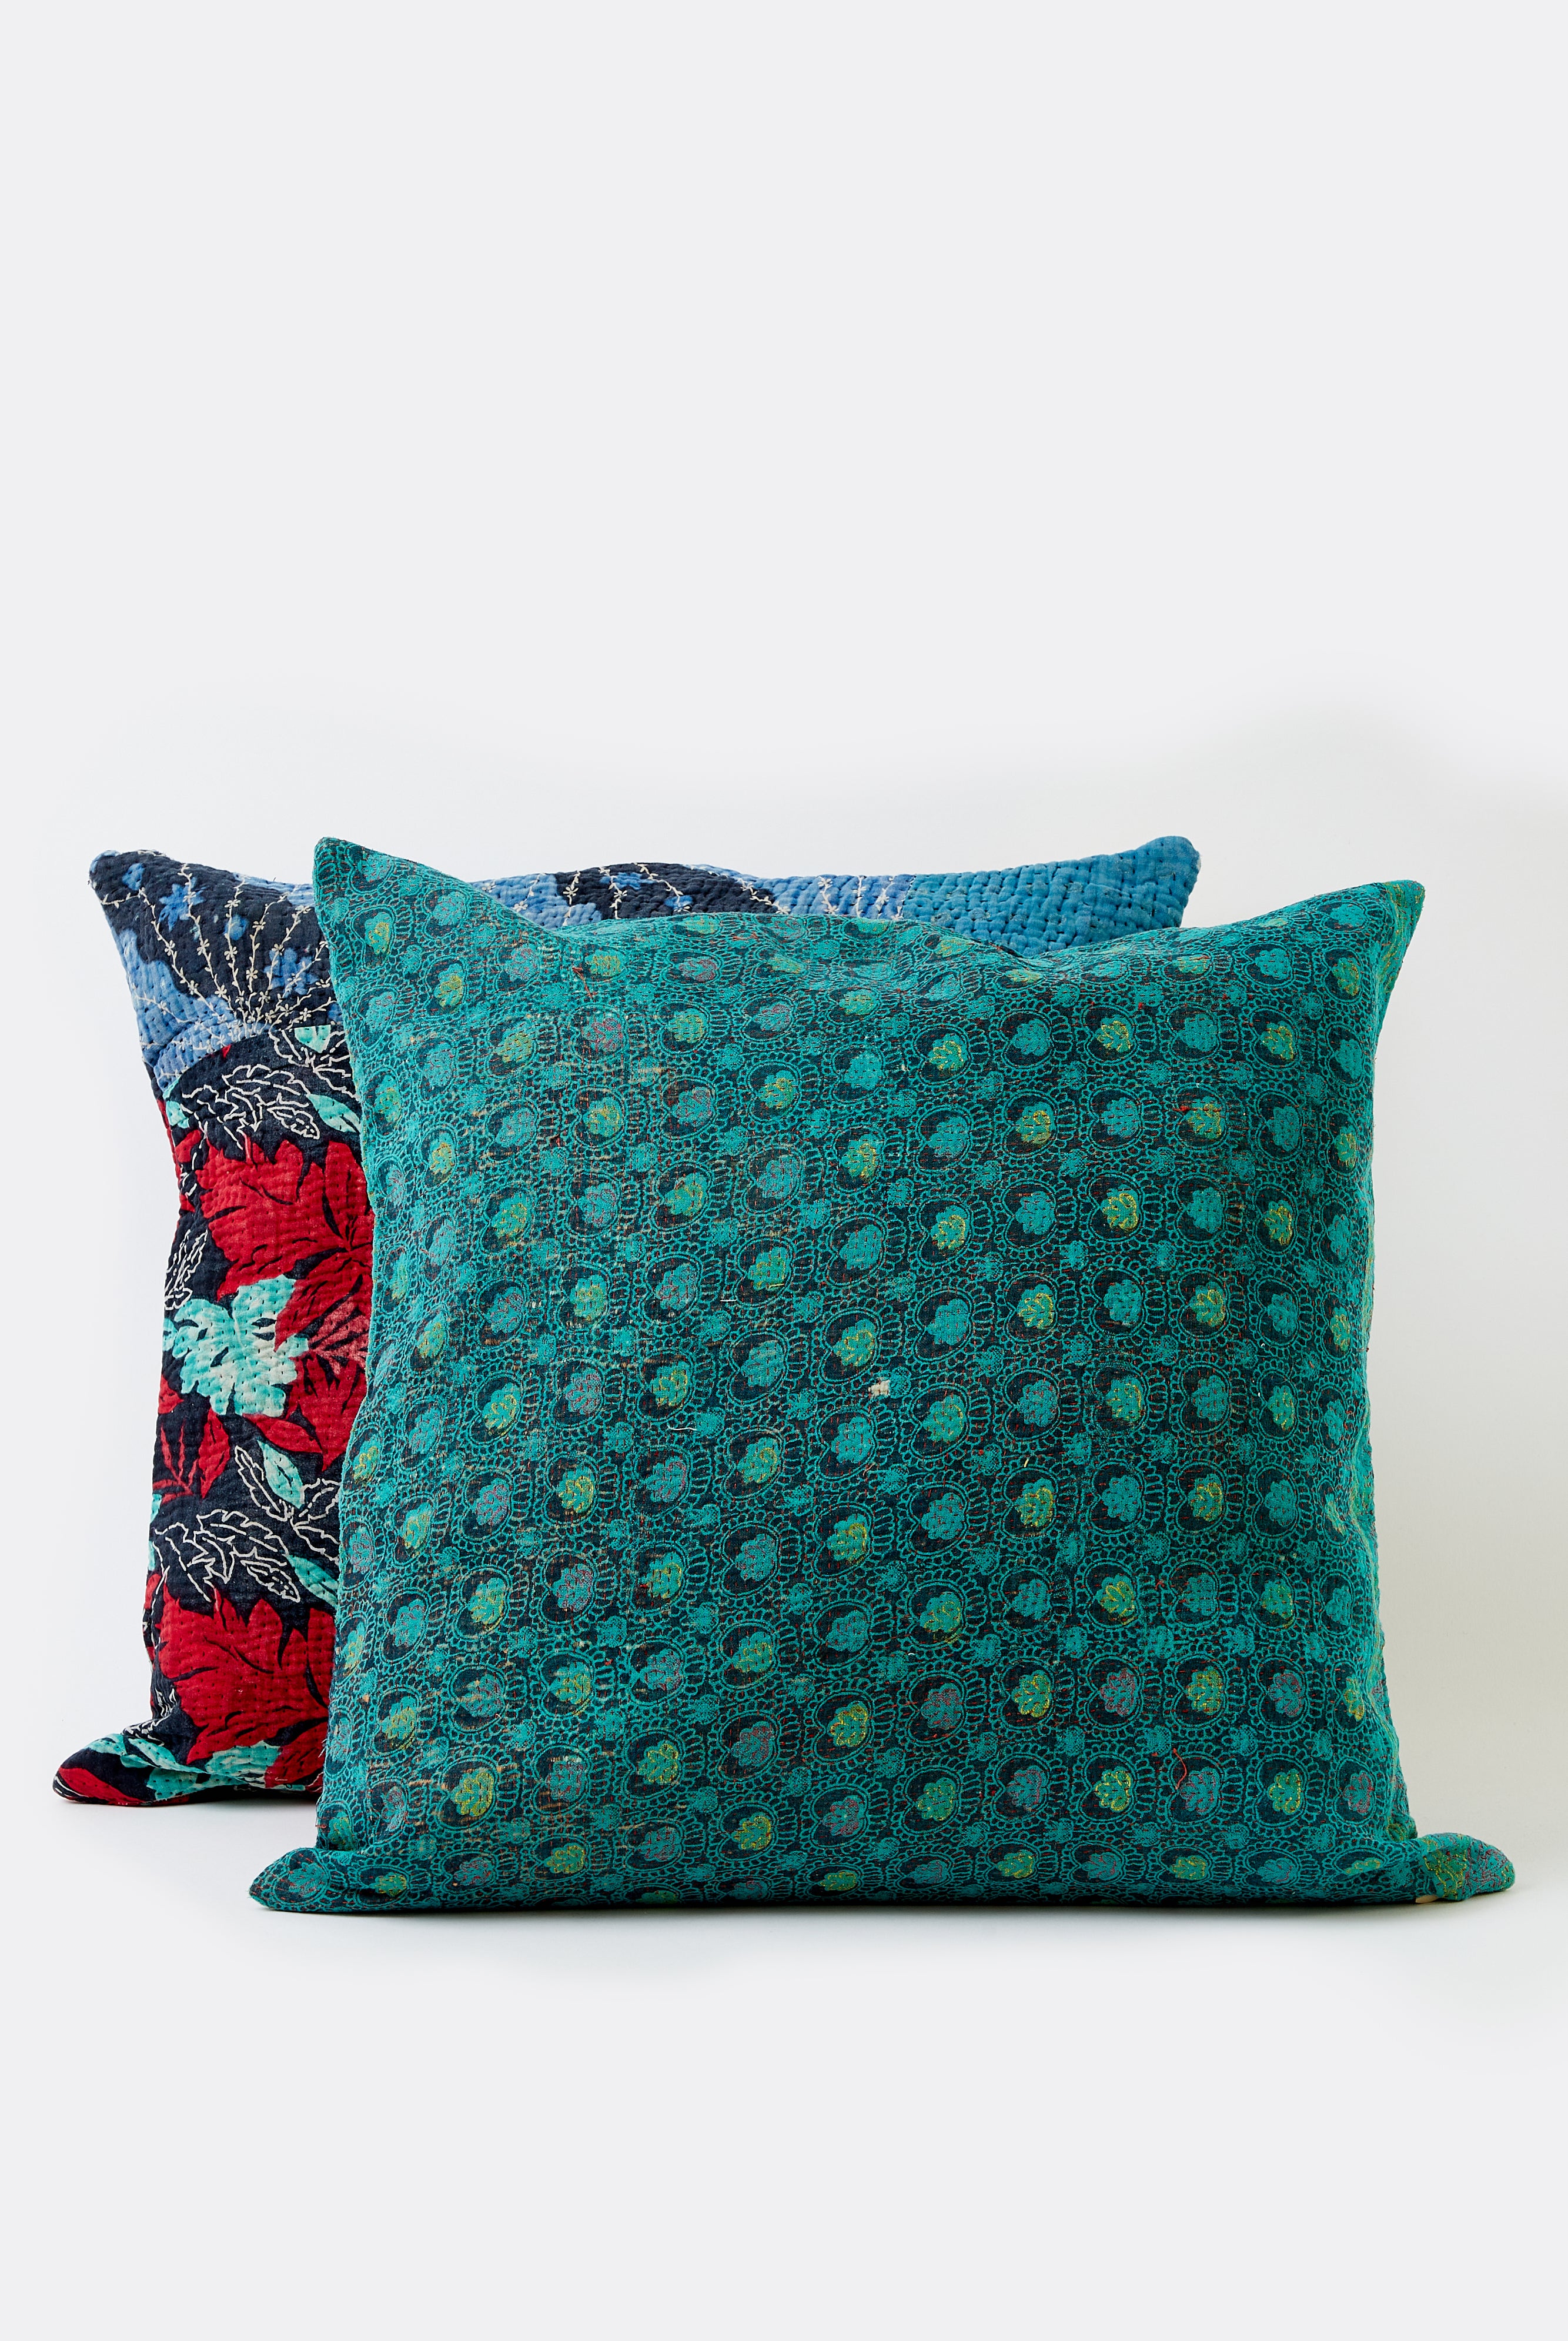 AUNTIE OTI UPCYCLED KANTHA  PILLOW CASES, SET OF 2